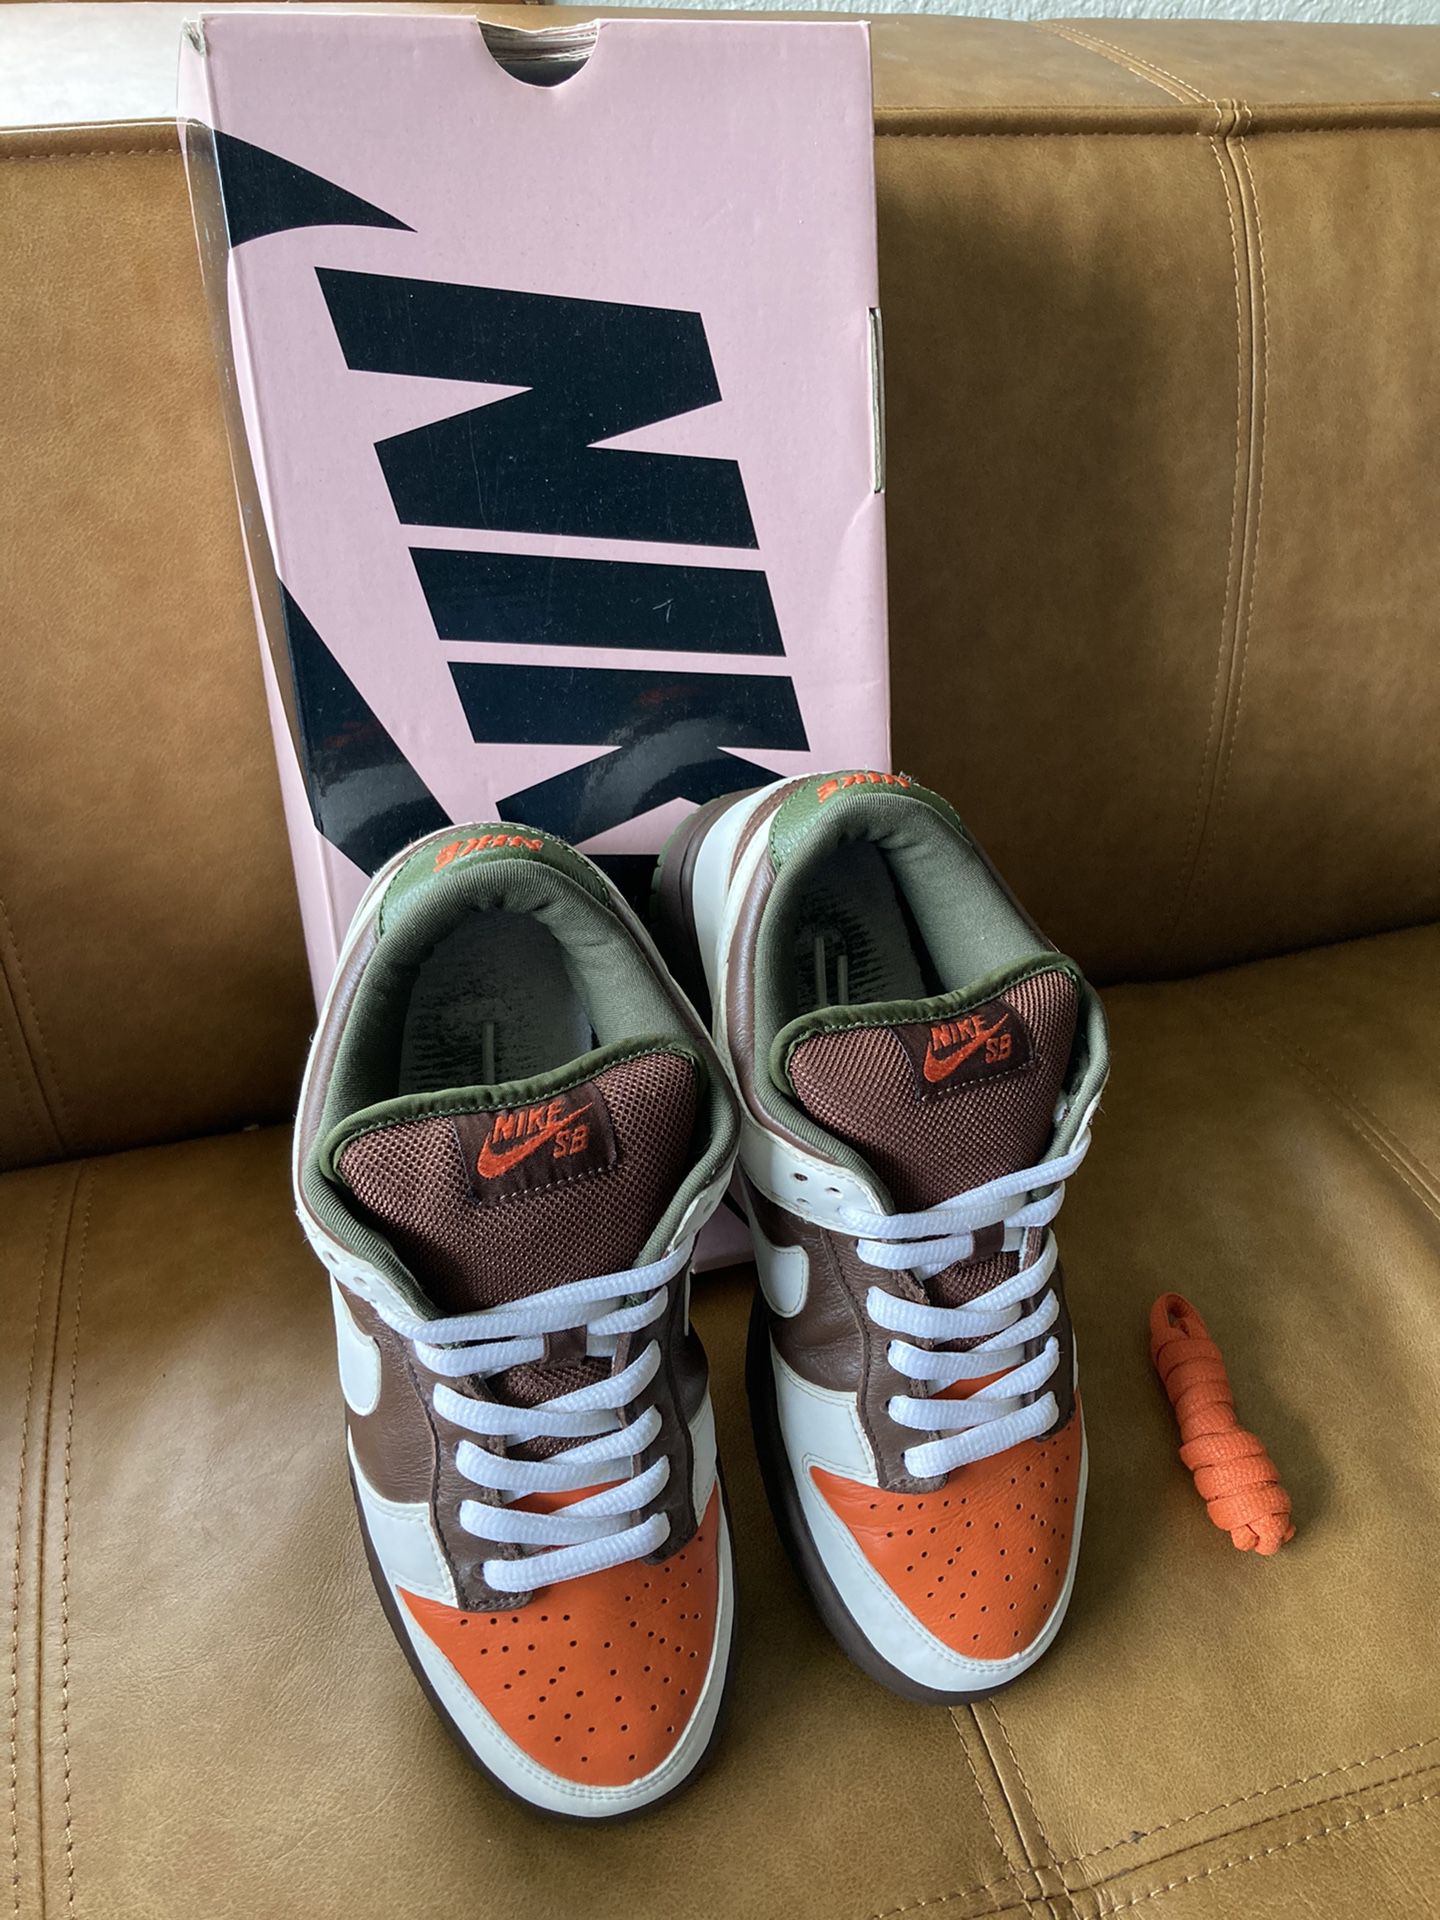 Nike Low Loompa for Sale Portland, OR - OfferUp